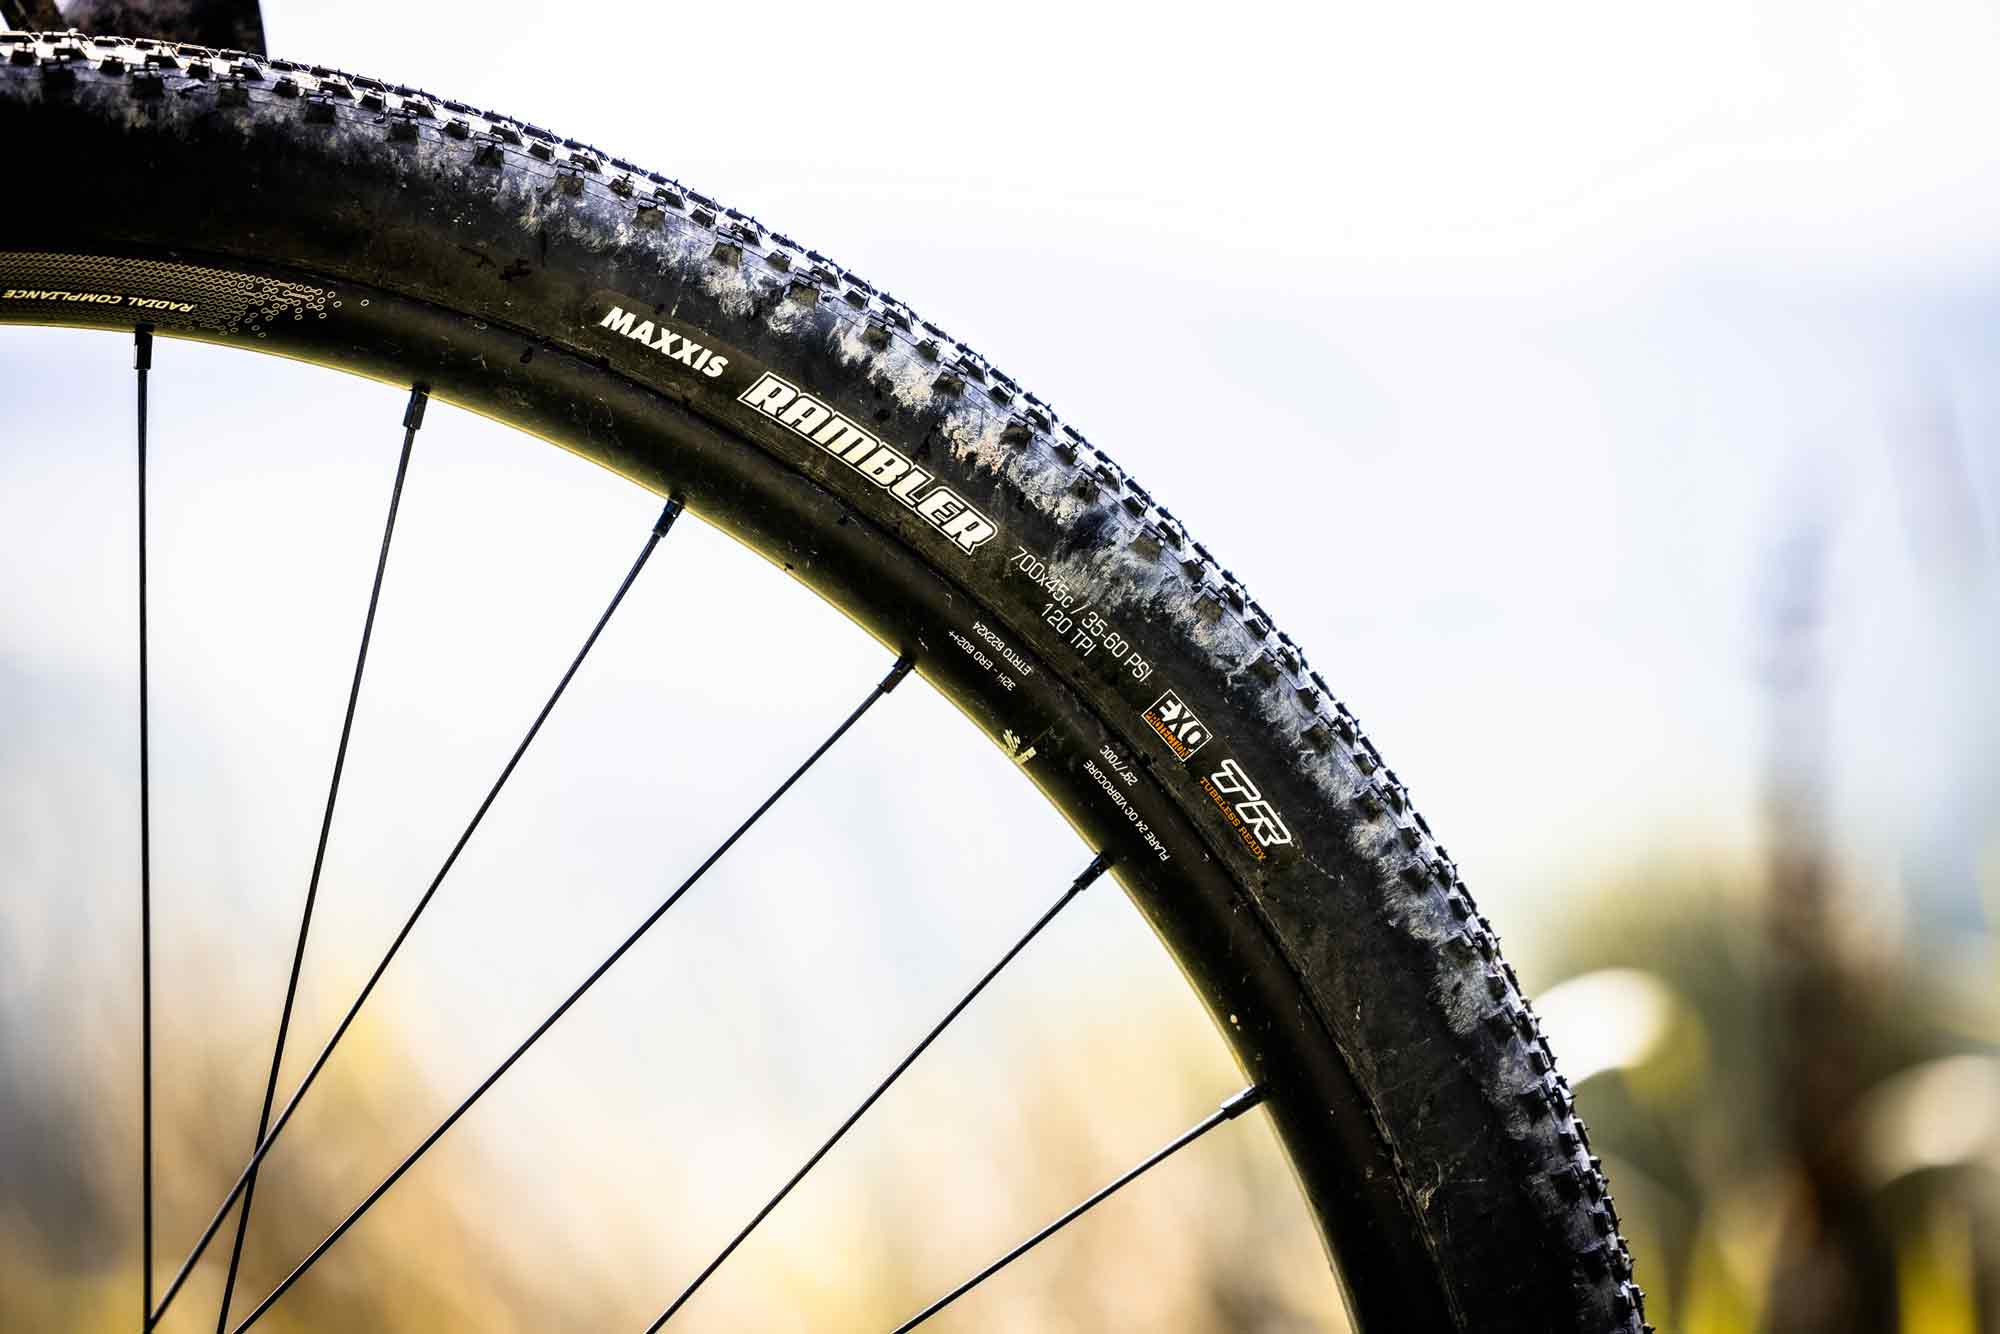 Maxxis gravel tyre test: the rambler is available in various sizes.